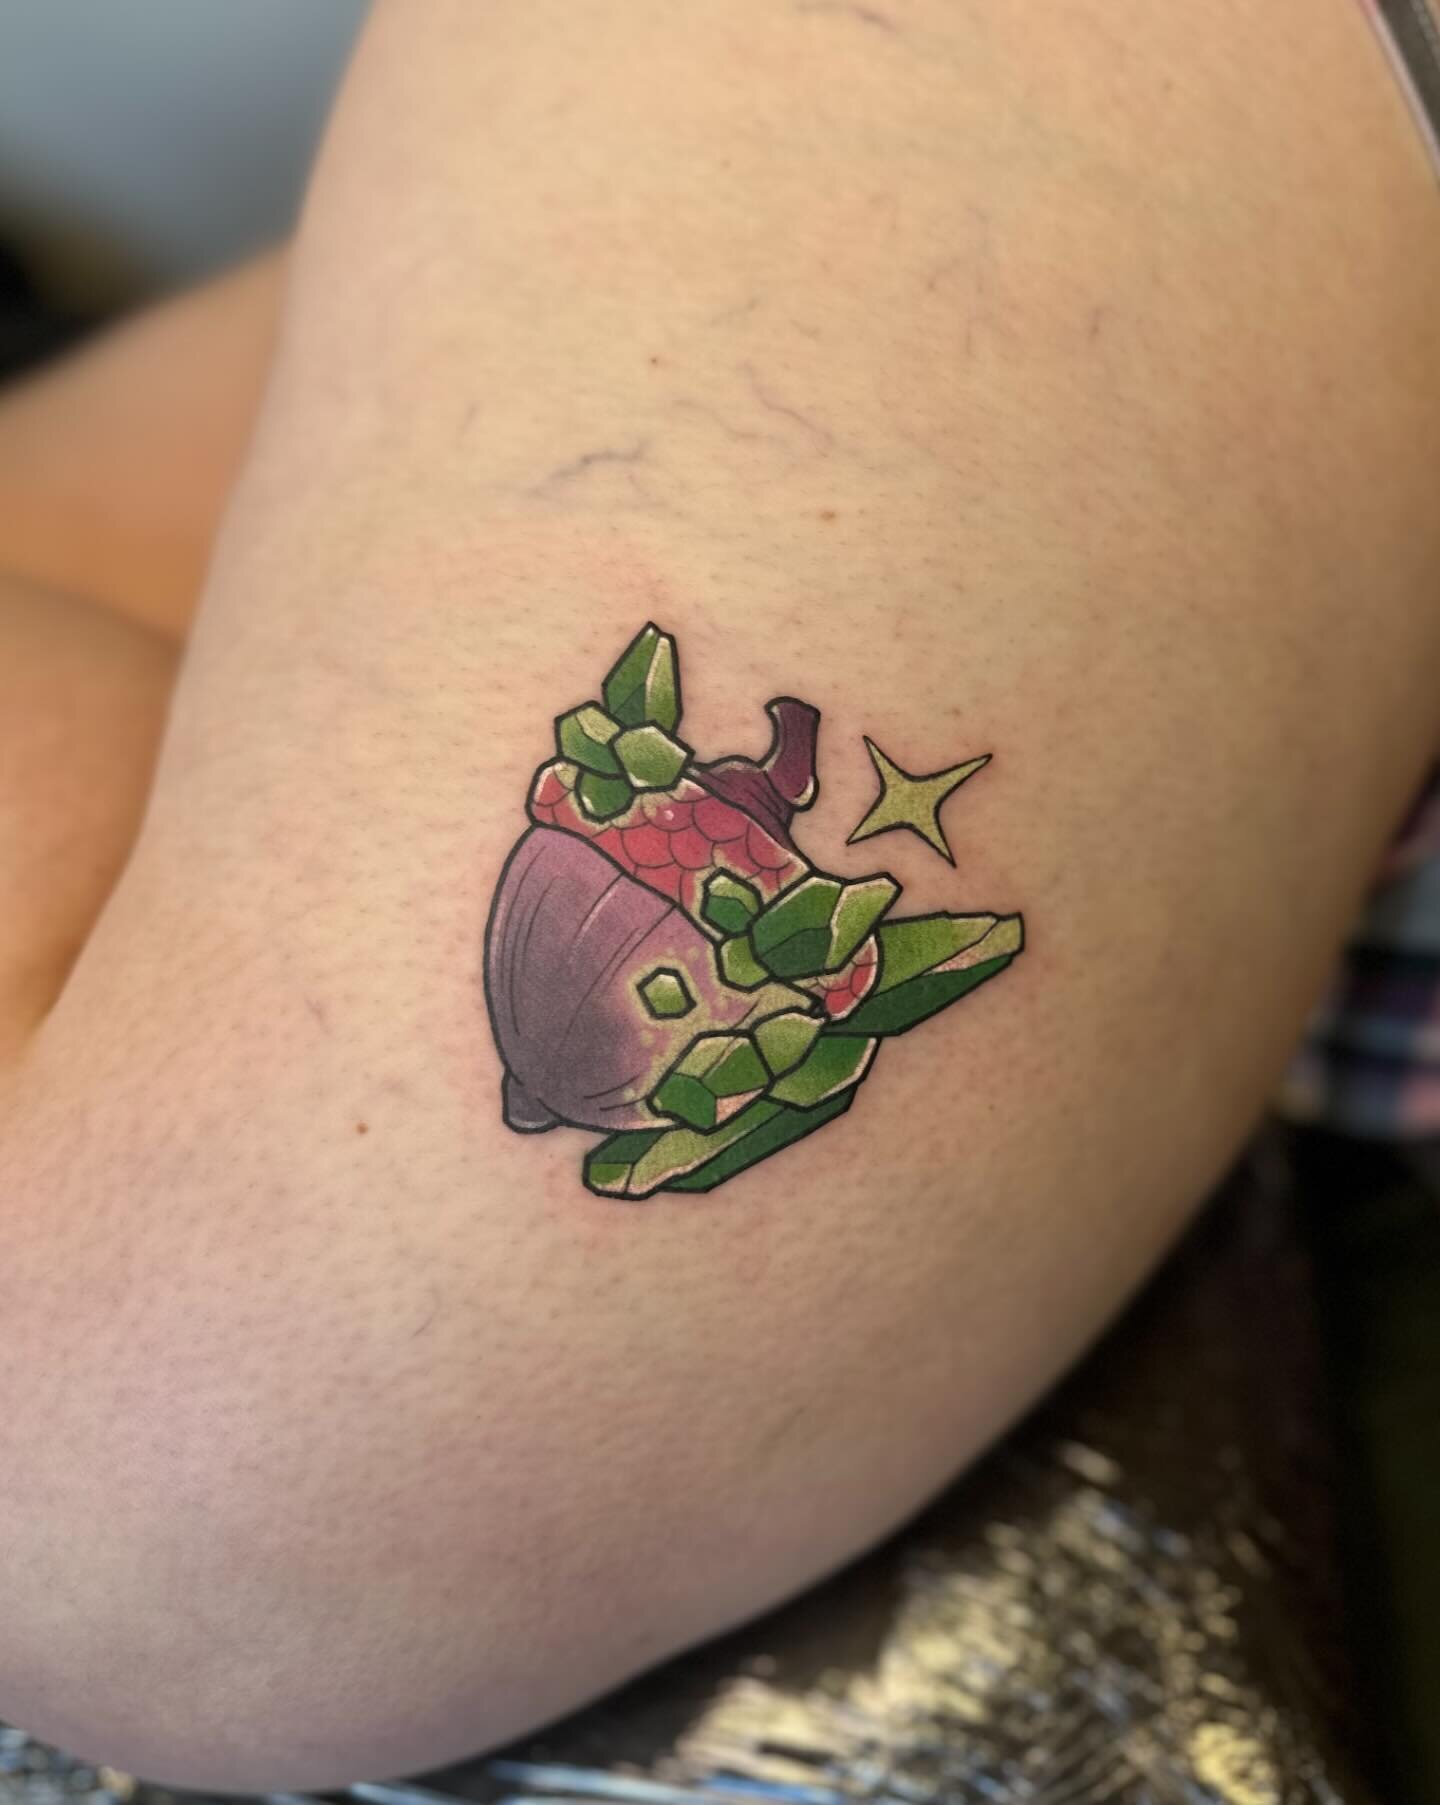 The first of my crystal acorns I&rsquo;ve gotten to do, in fun custom colors for Emma&rsquo;s first tattoo!! Thank you for the trust, hope it&rsquo;s healing up well!!
.
.
.
#Tattoo #ladytattooers #ohiotattooers #columbustattooers #whiteraventattoost